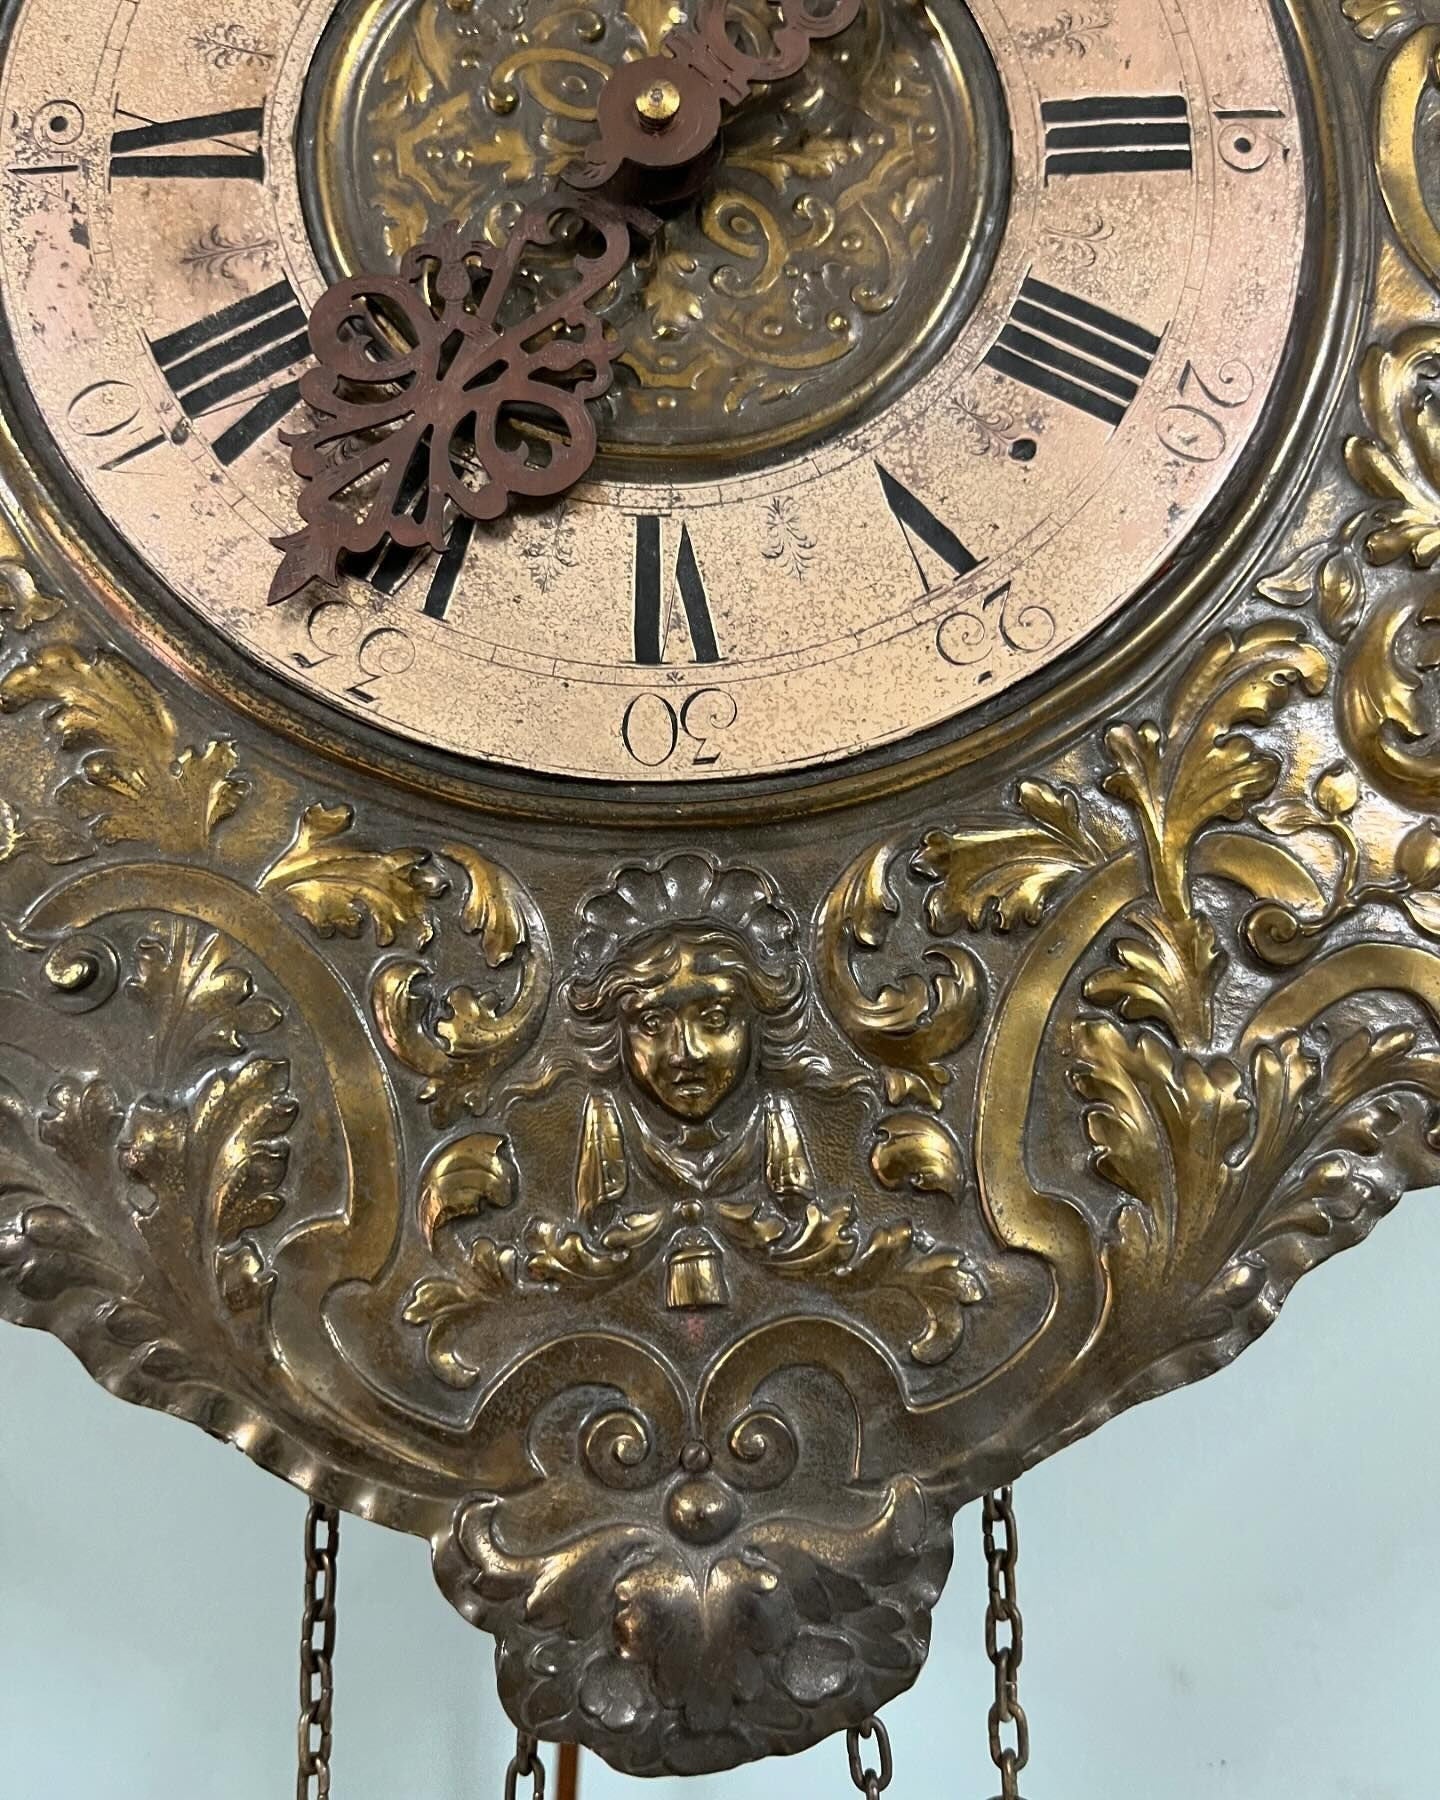 Antique German Wall Clock with Chain Wind and Gong Chime | 45x35 cm | Collectible Vintage Timepiece